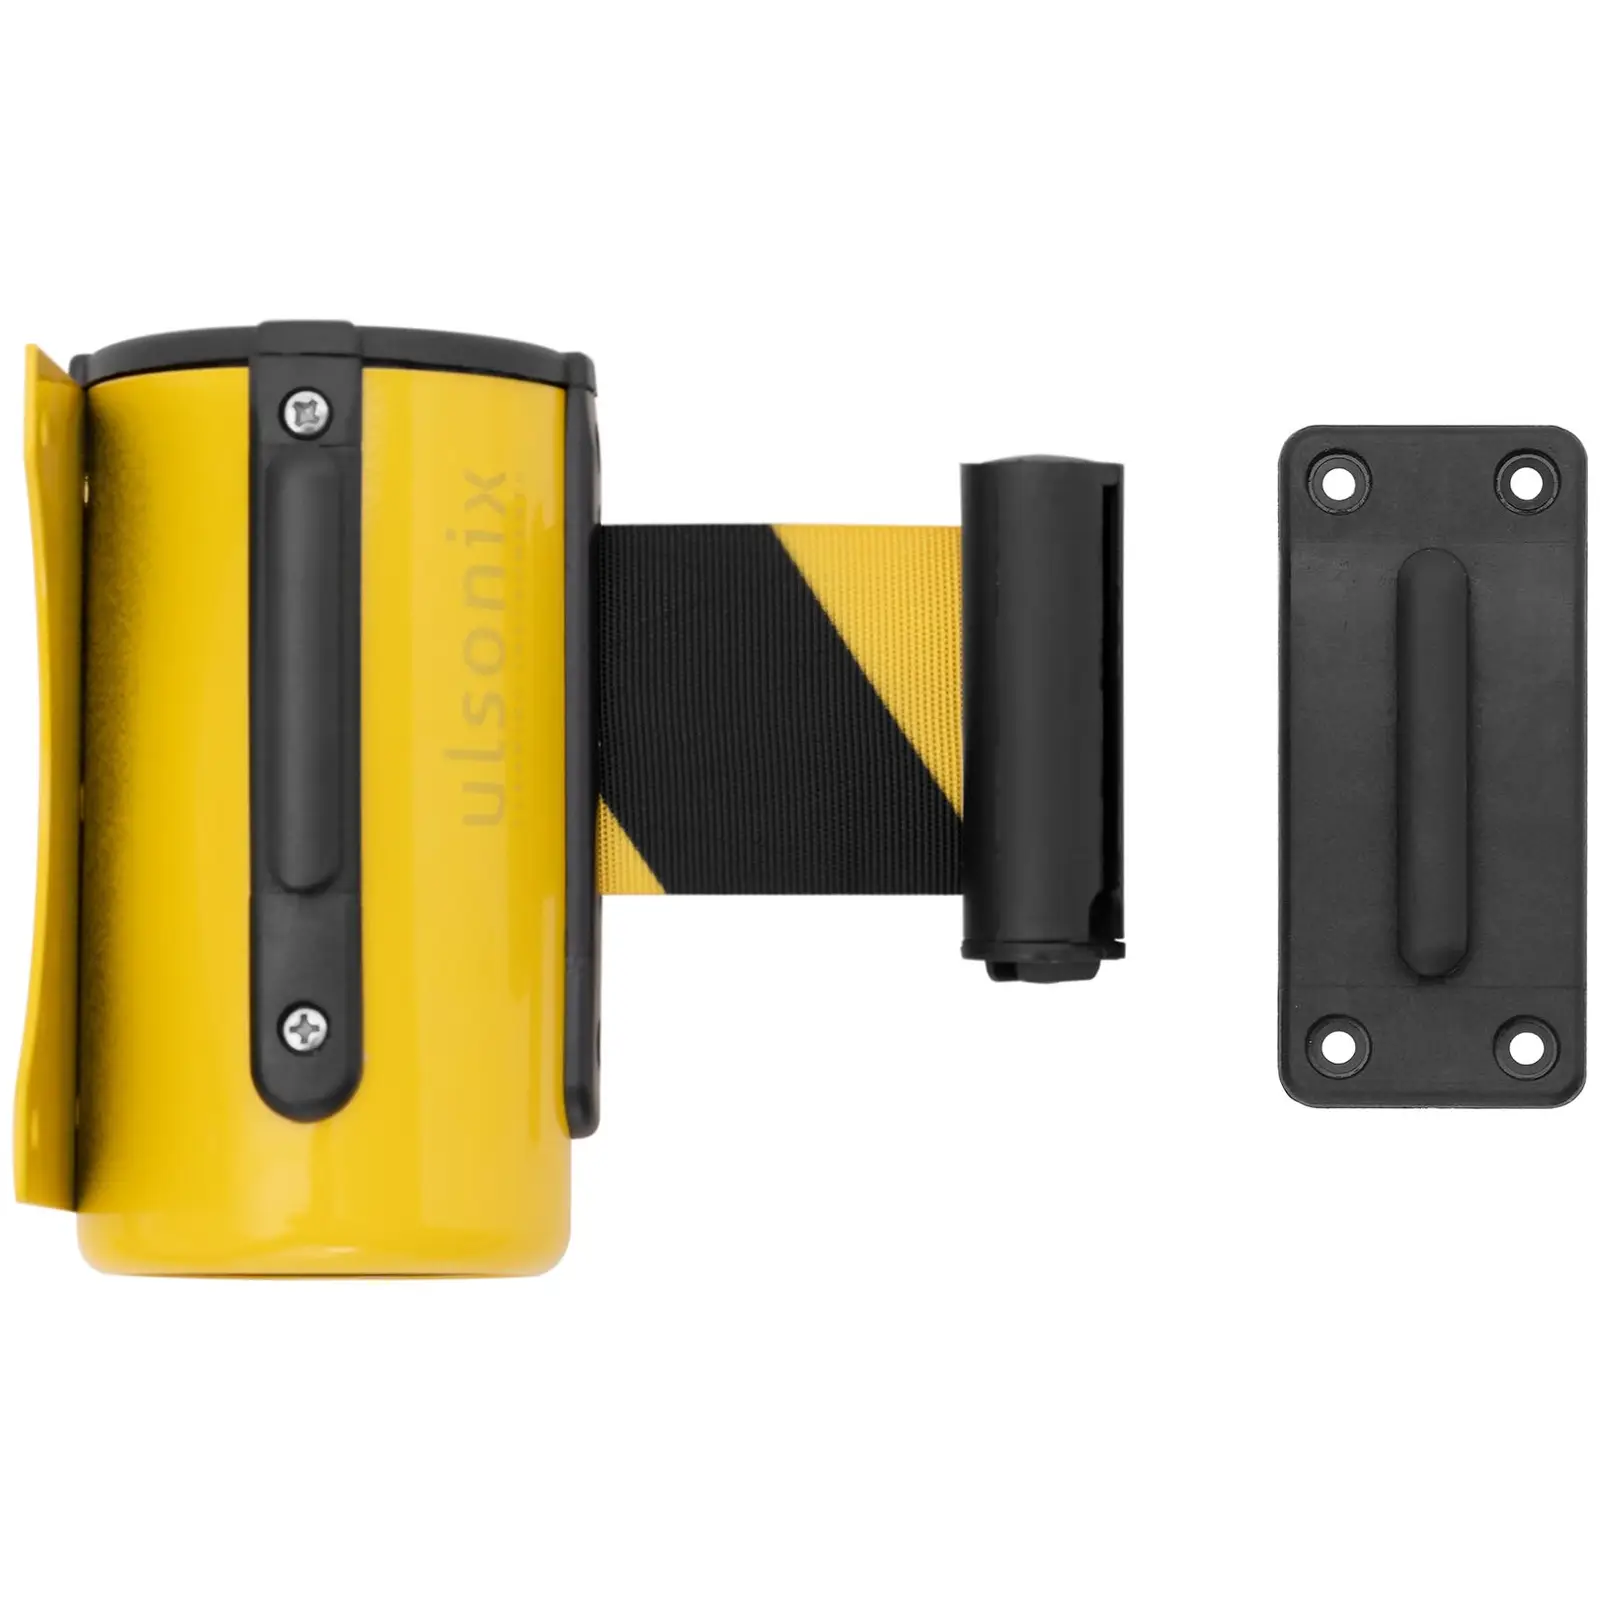 Wall Mounted Retractable Belt - yellow/black - 2 m